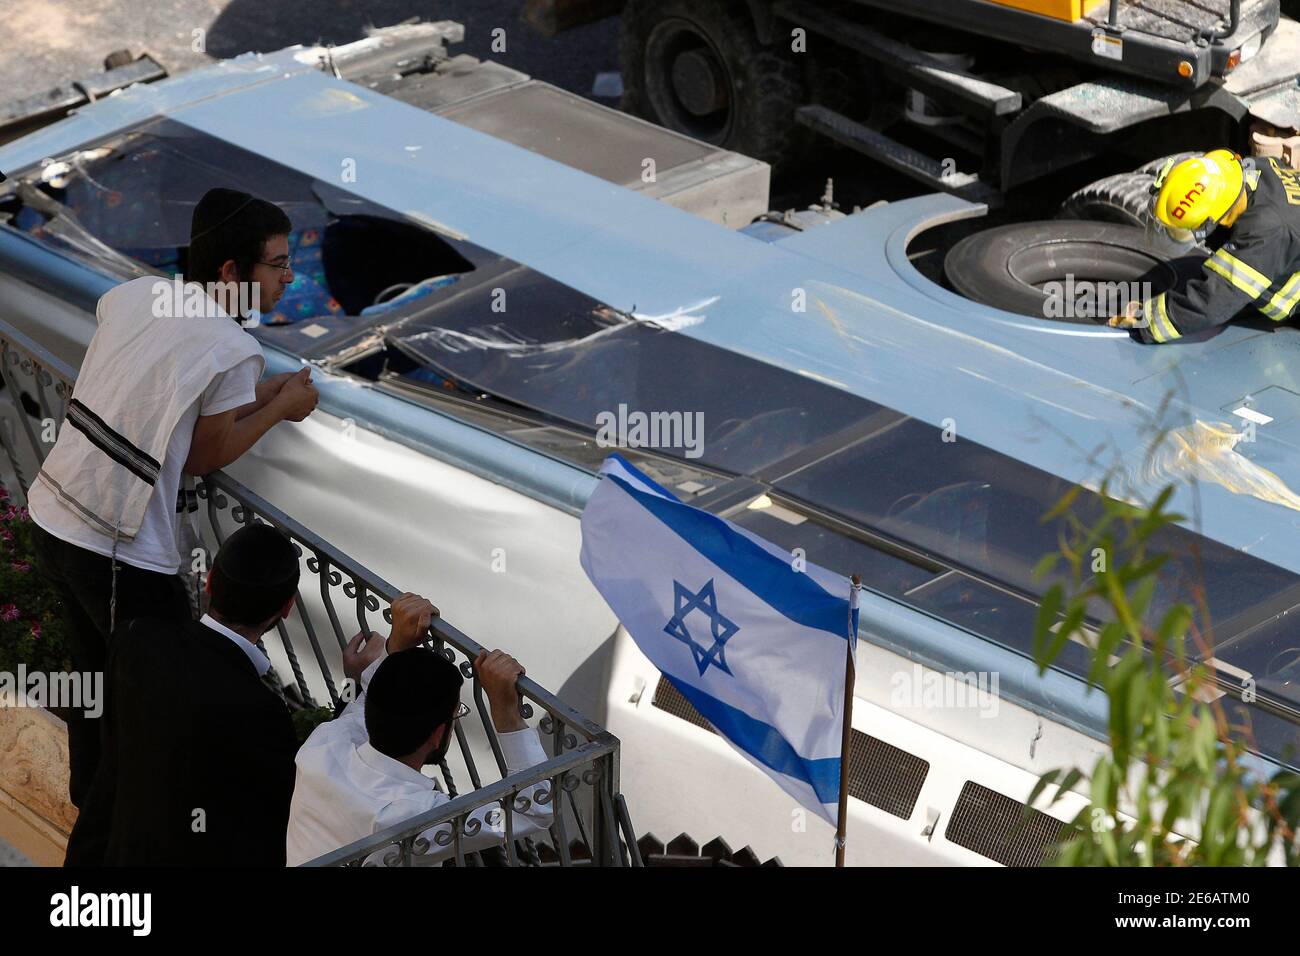 Residents look at an overturned bus at the scene of a suspected attack in Jerusalem August 4, 2014. A Palestinian used his heavy construction vehicle to run down and kill an Israeli and overturn the bus on a main Jerusalem street on Monday in attacks that ended when policemen shot him dead, police said. REUTERS/Siegfried Modola (JERUSALEM - Tags: POLITICS CIVIL UNREST) Stock Photo